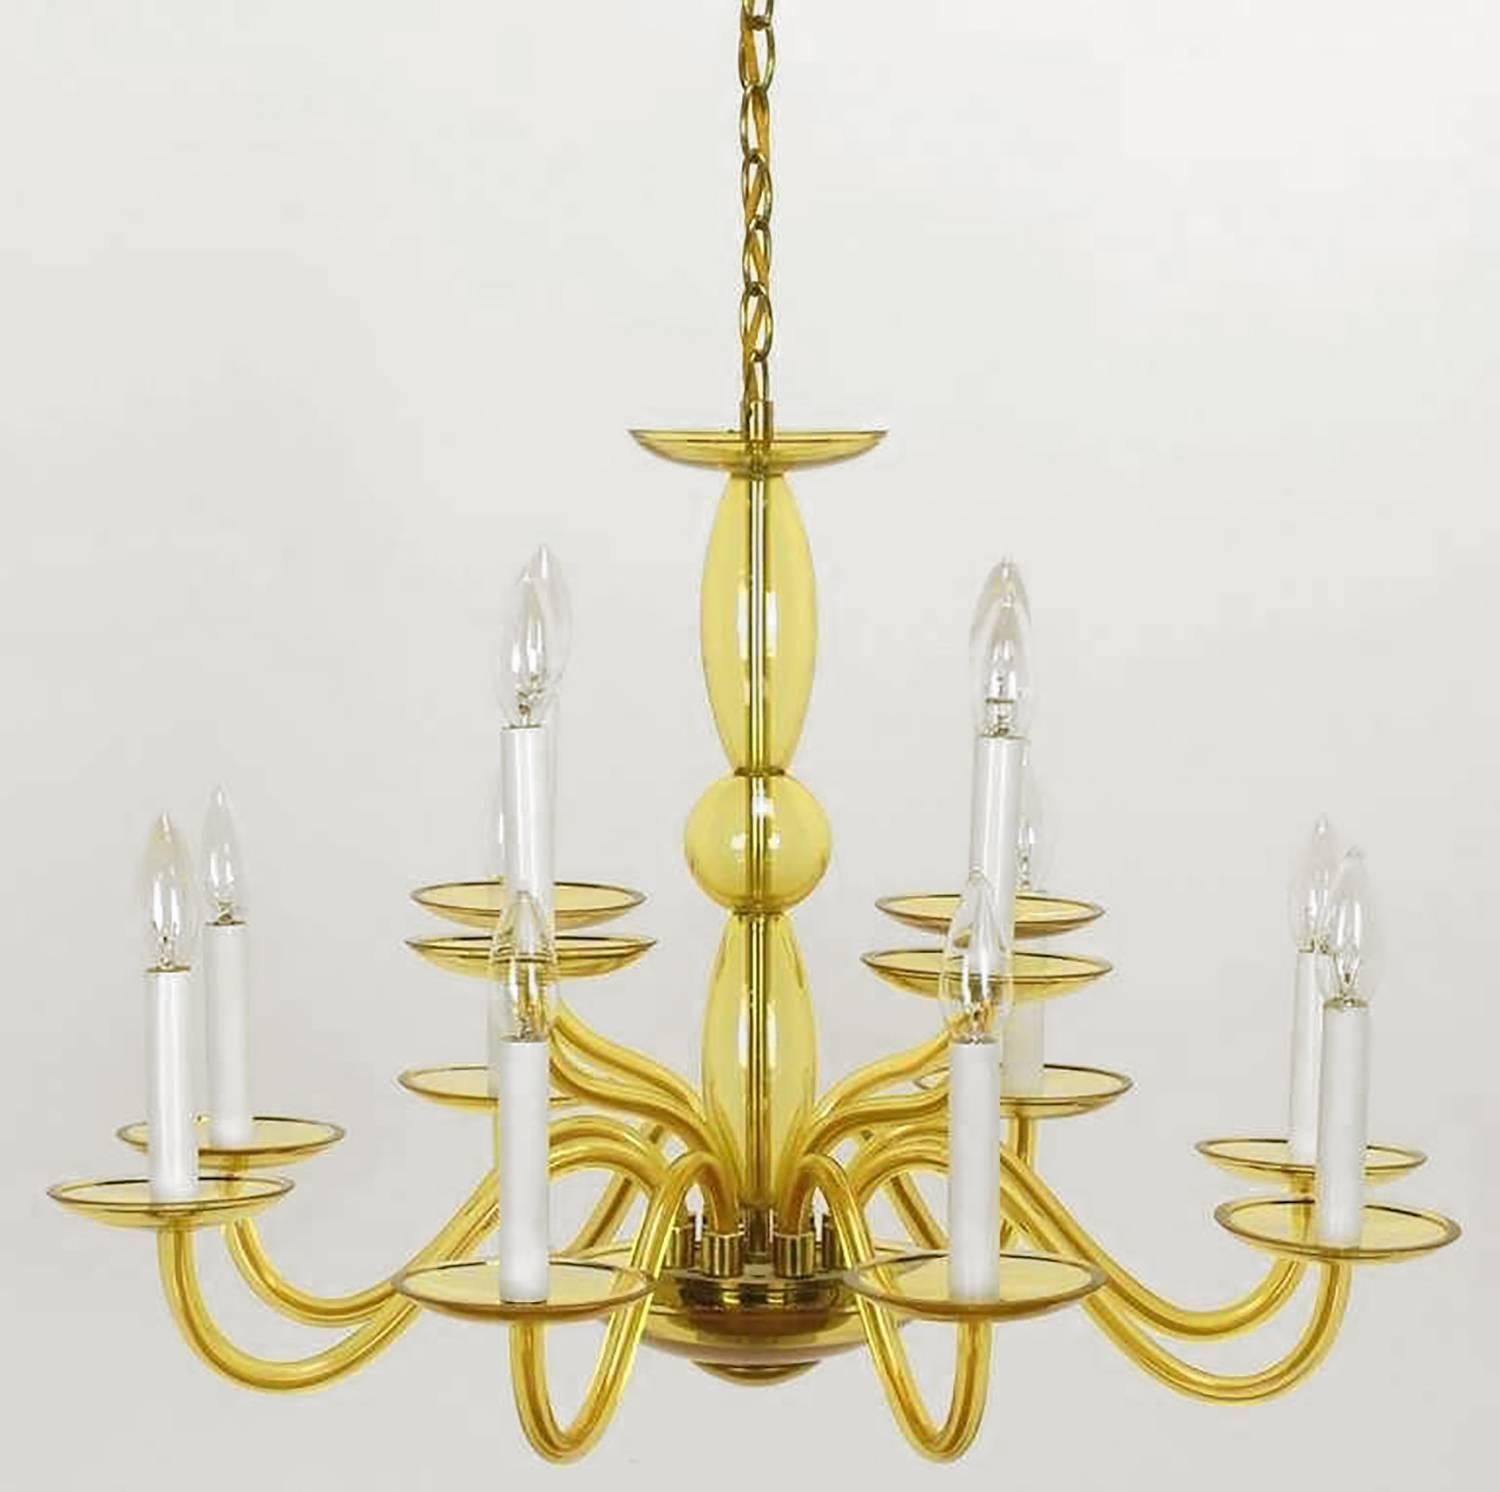 1940s Murano champagne color glass chandelier, with hand-painted gold accents. Has two tiers, the lower with eight arms, and the upper with four. Sold with brass chain and matching glass canopy.